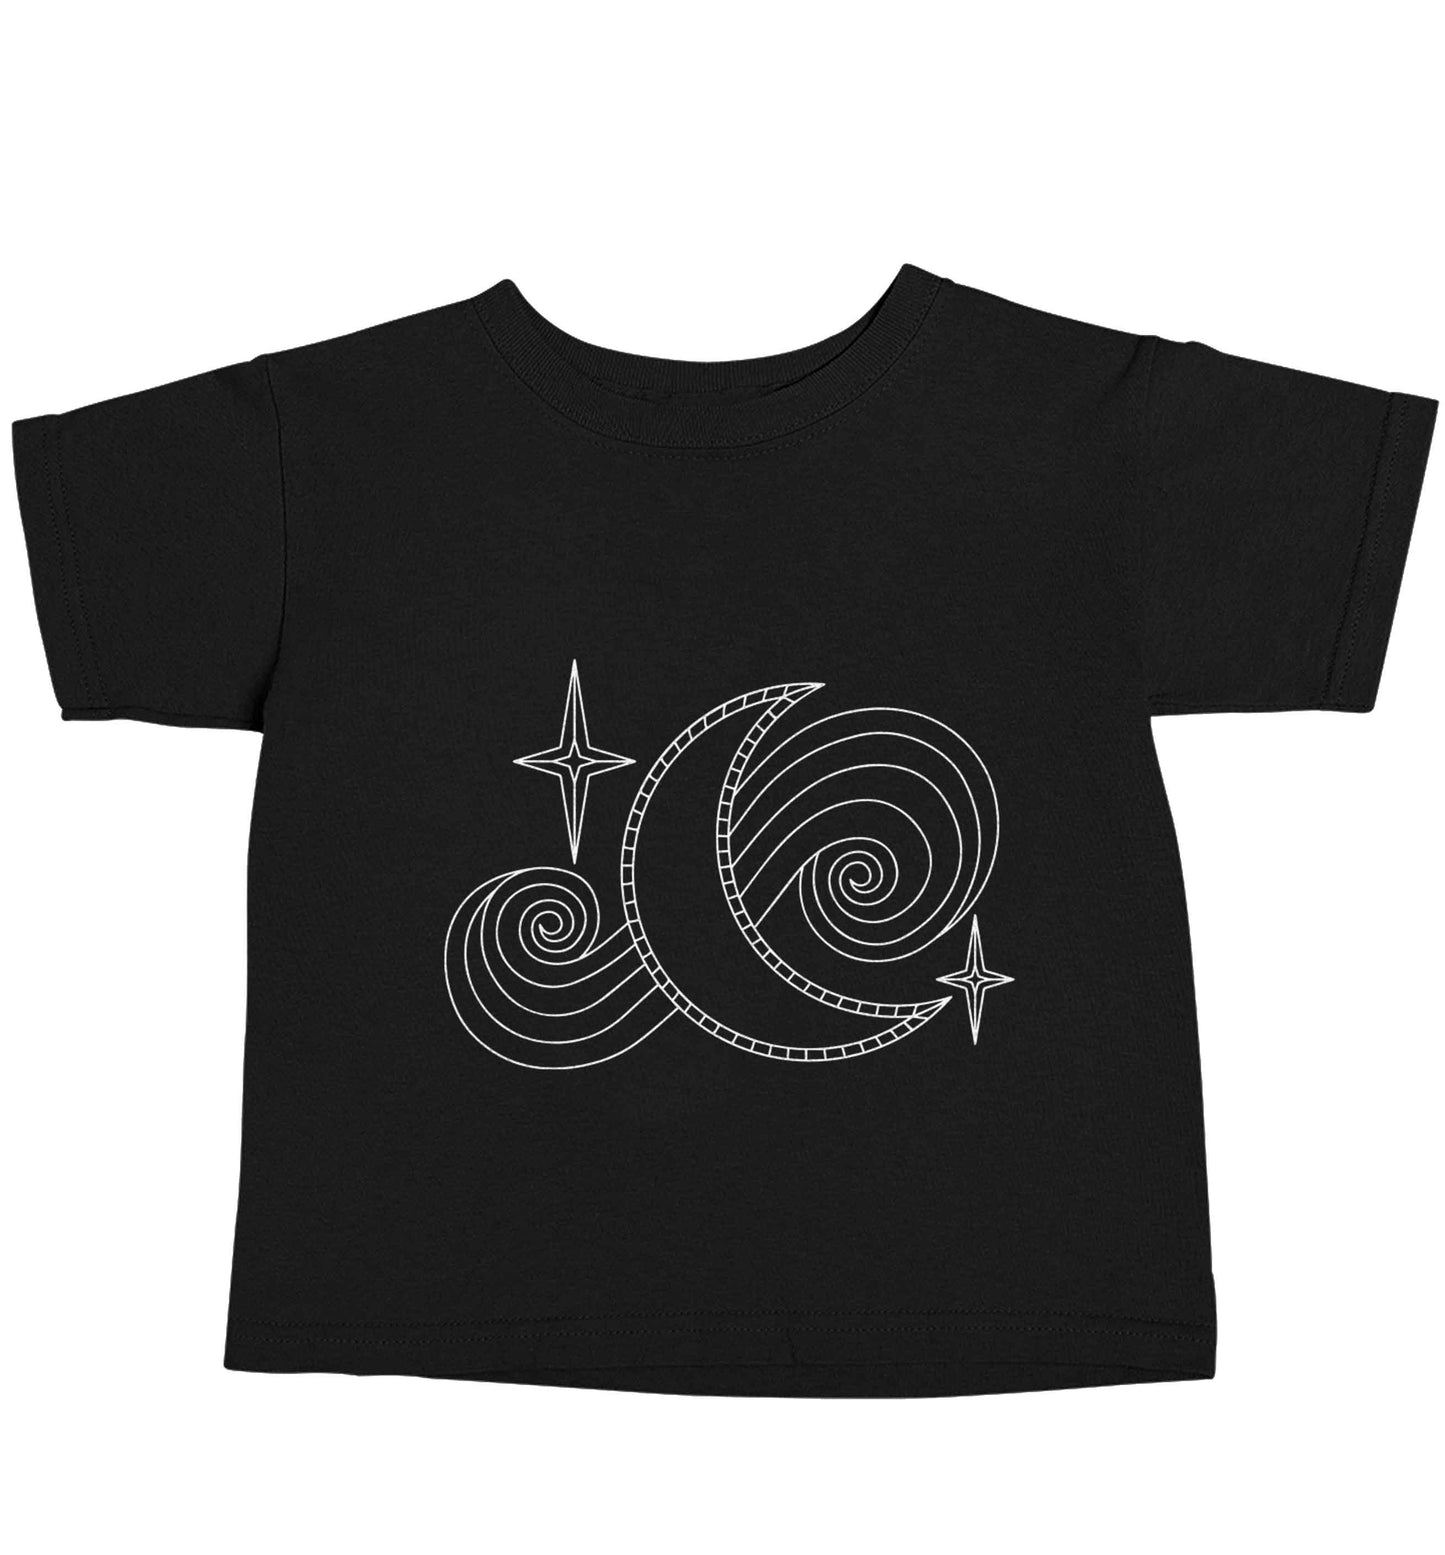 Moon and stars illustration Black baby toddler Tshirt 2 years